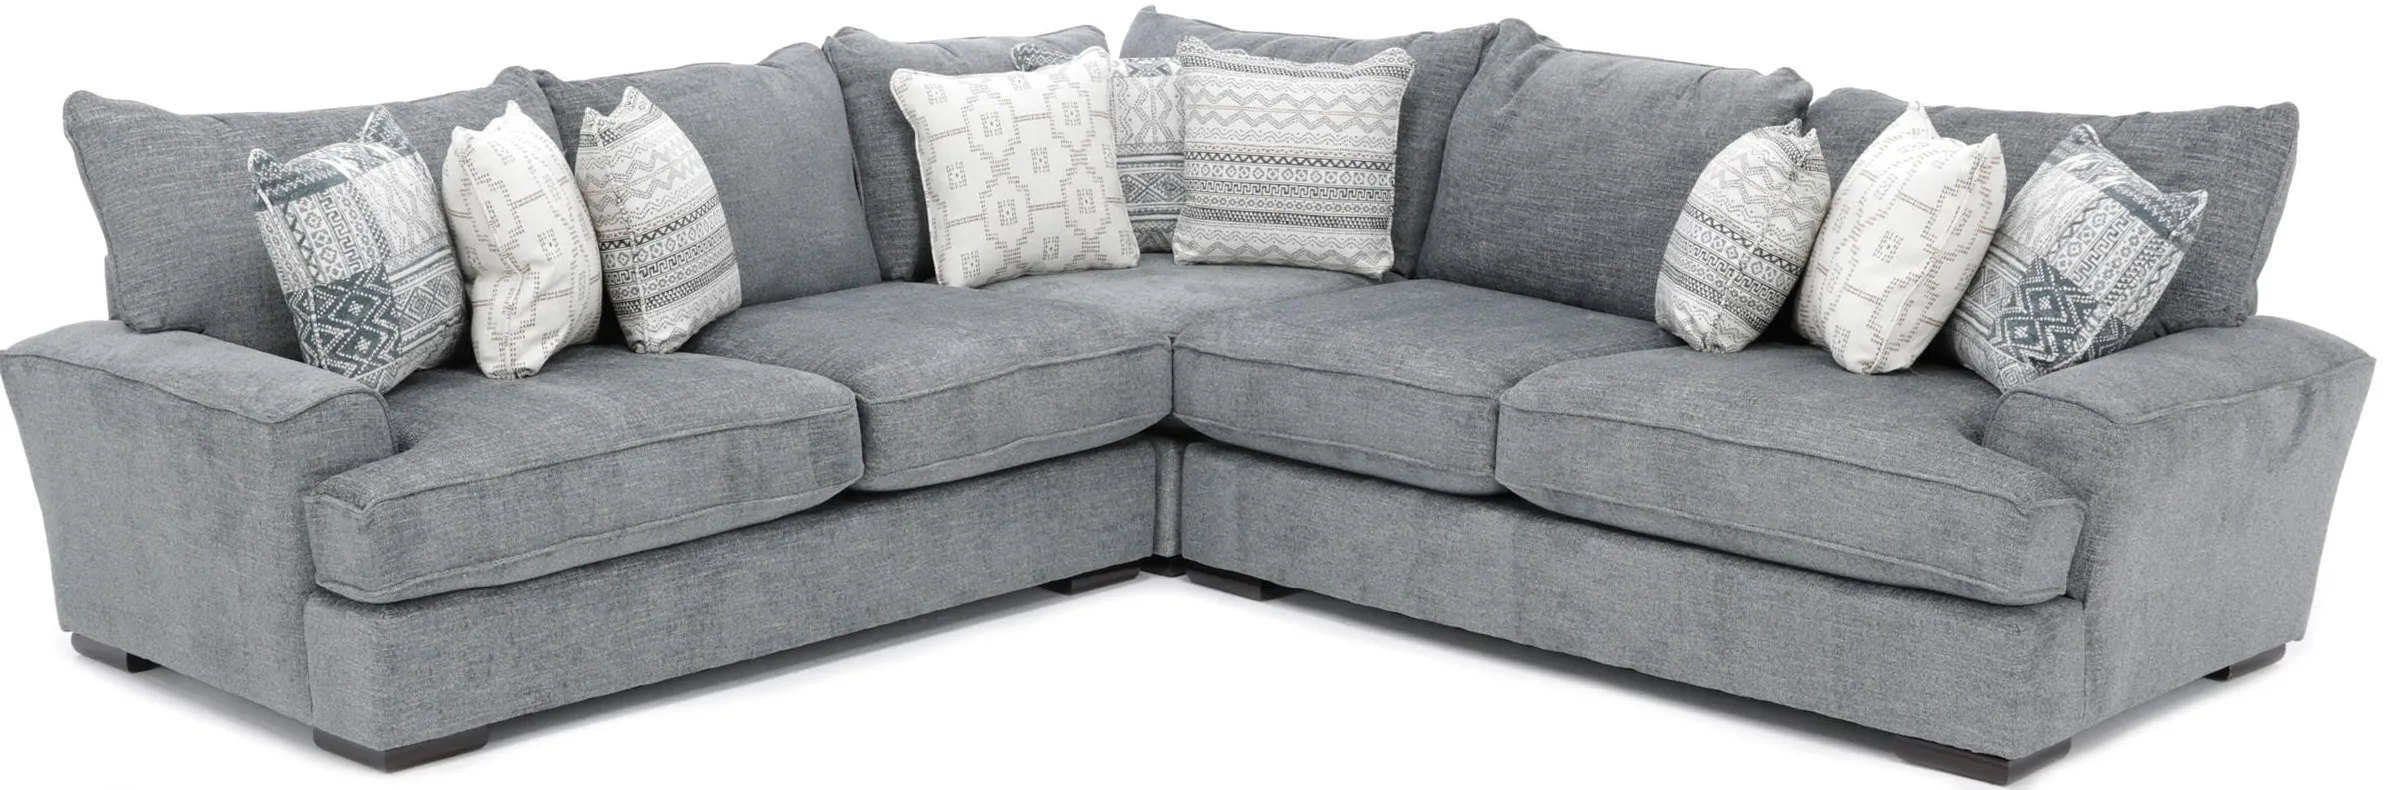 Tribecca 3-Pc. Sectional